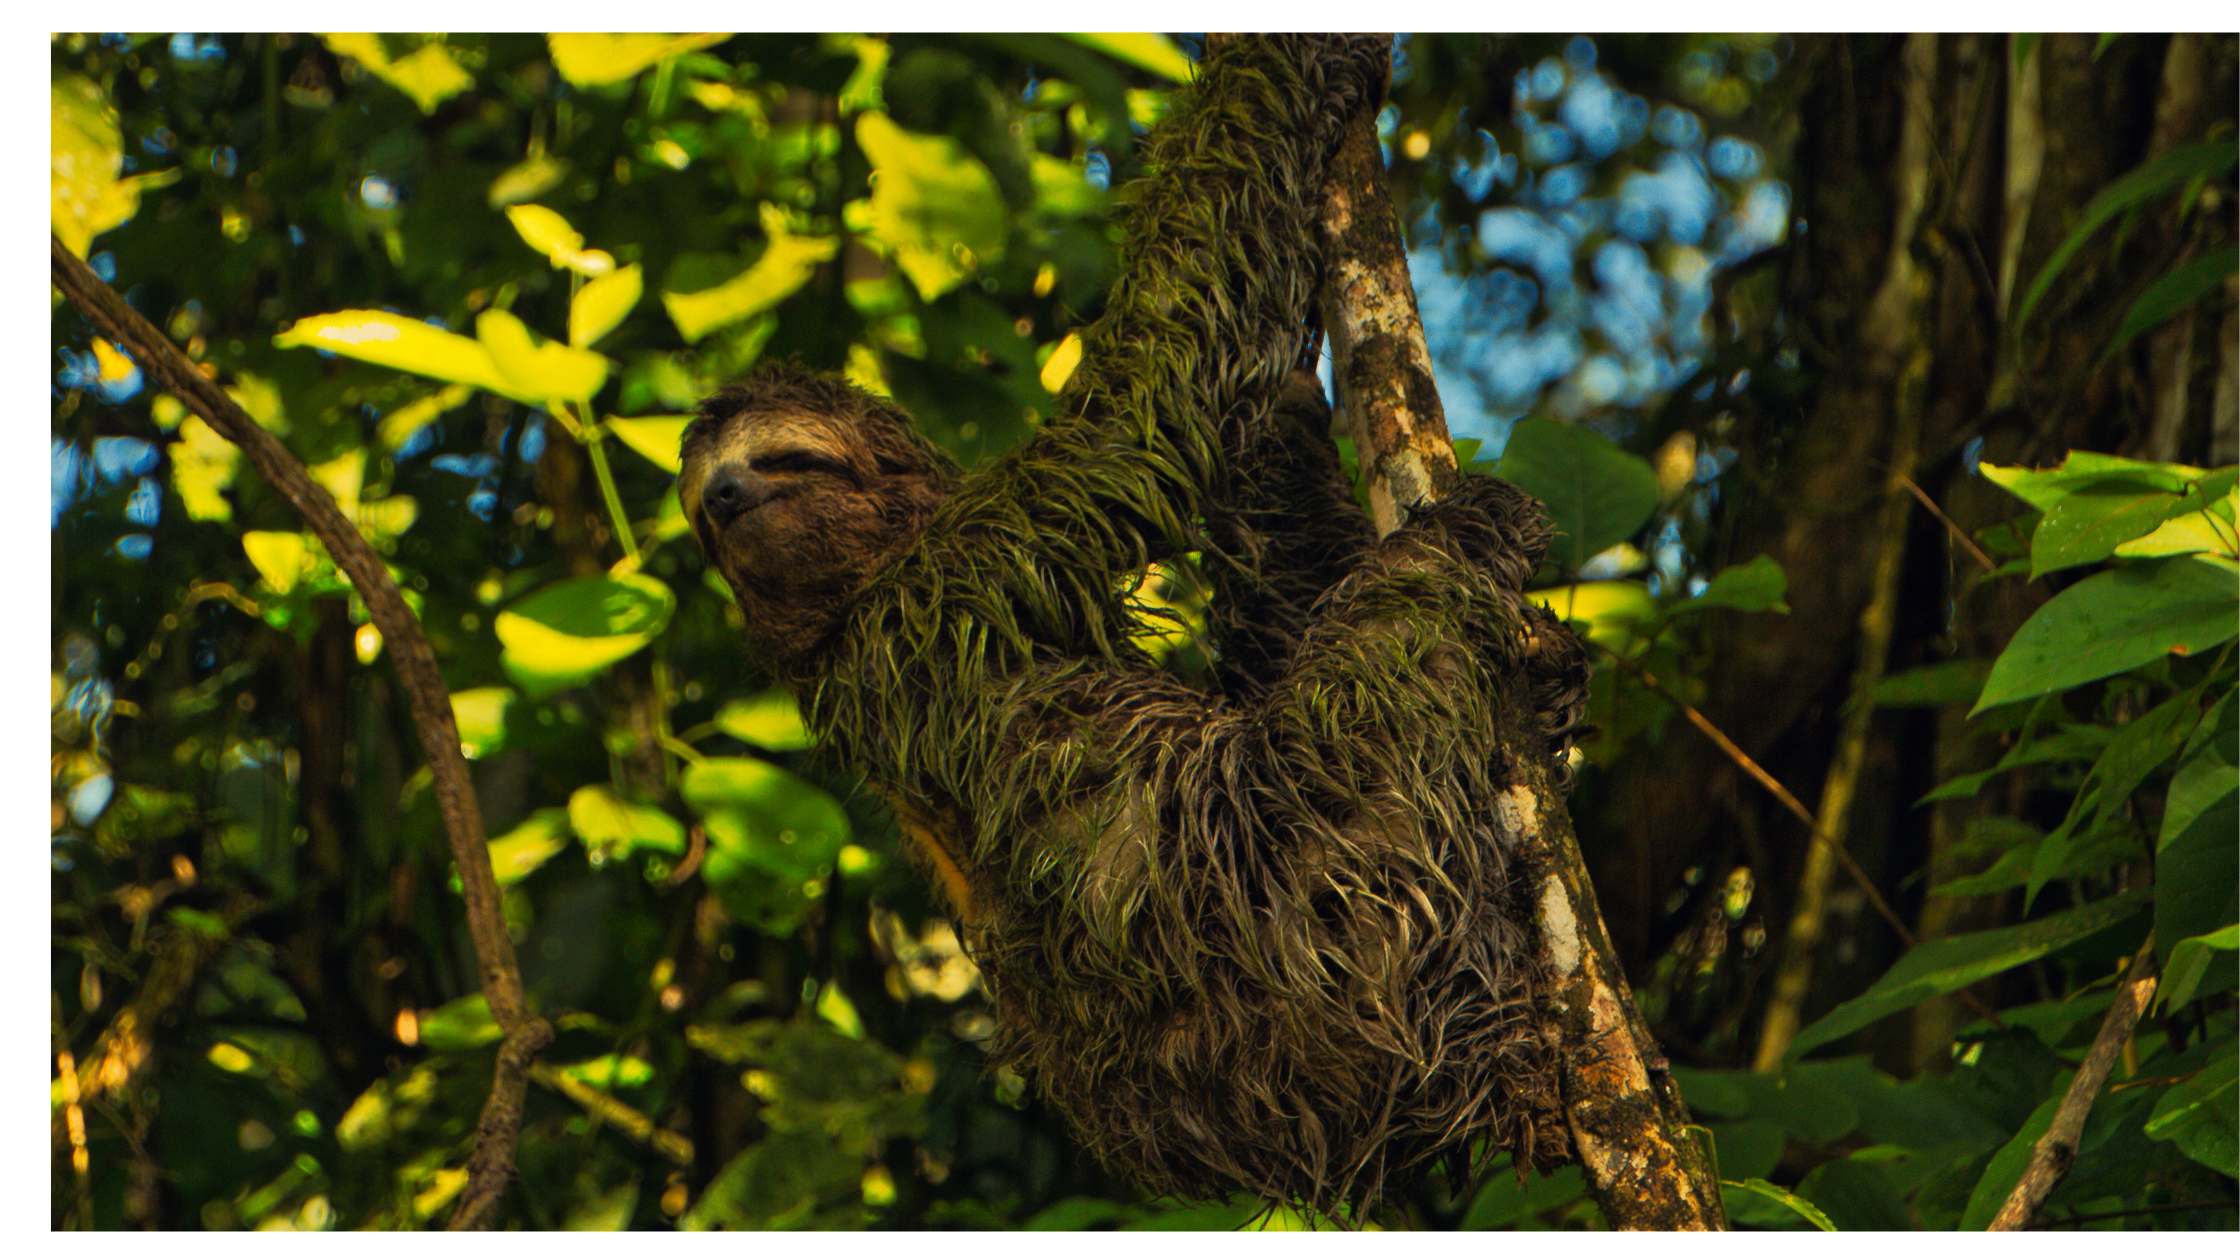 camoflaged sloth in a tree